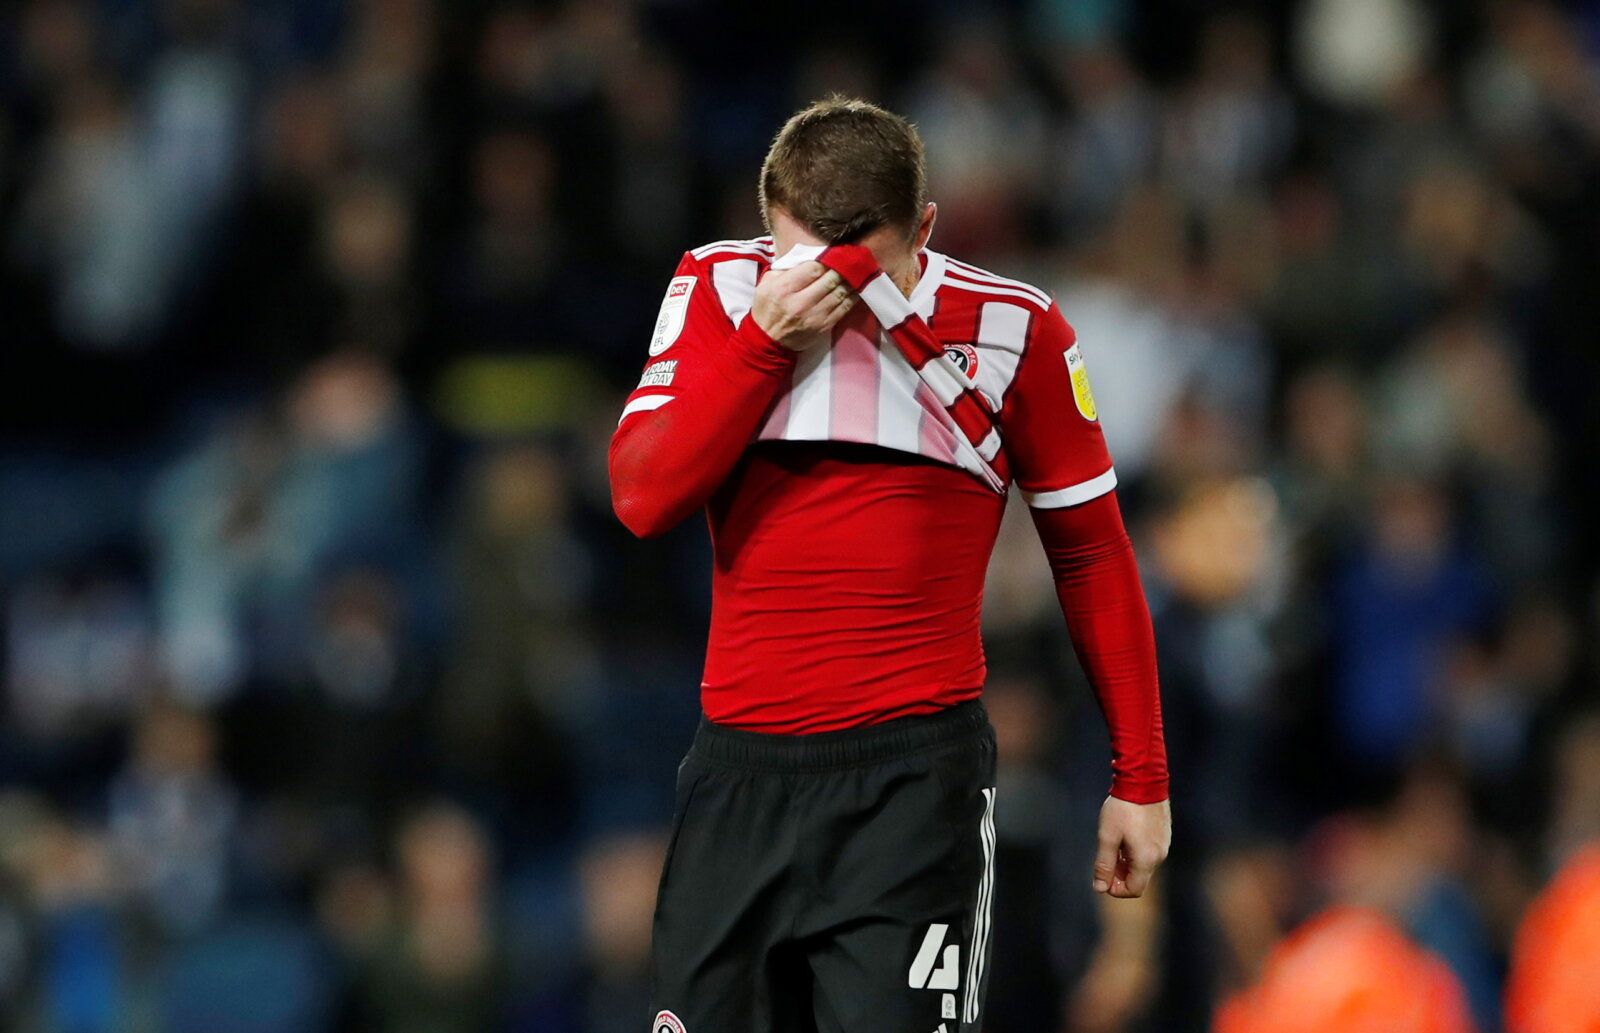 Soccer Football - Championship - West Bromwich Albion v Sheffield United - The Hawthorns, West Bromwich, Britain - August 18, 2021  Sheffield United's John Fleck looks dejected after the match     Action Images/Andrew Couldridge  EDITORIAL USE ONLY. No use with unauthorized audio, video, data, fixture lists, club/league logos or 